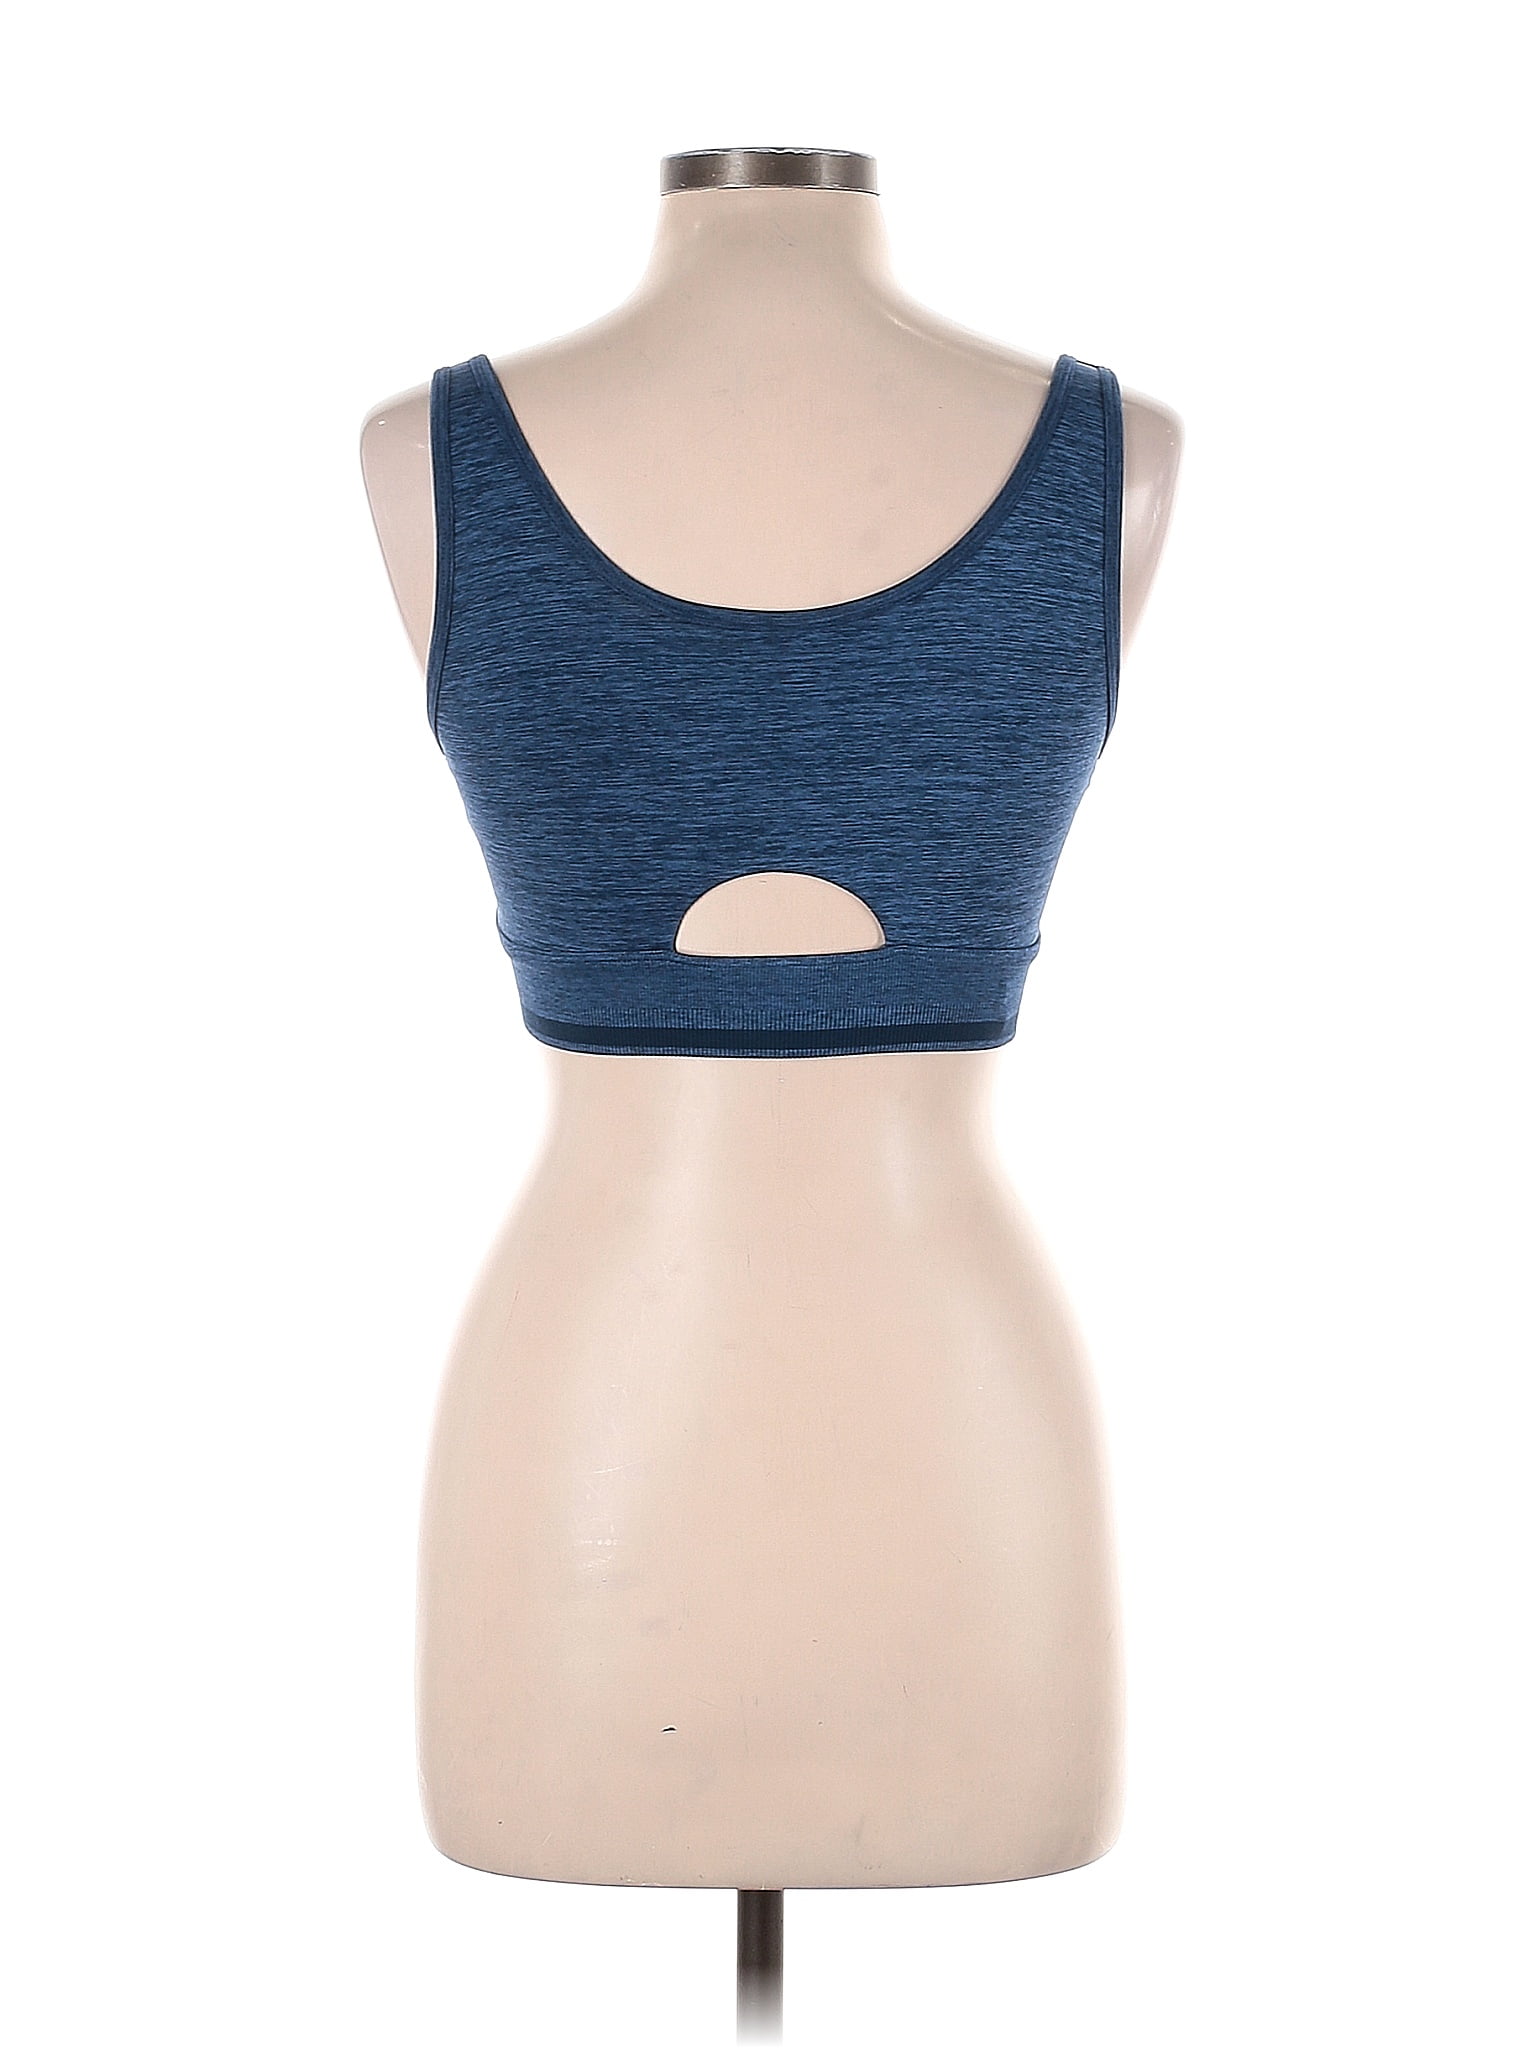 Buffbunny Sports Bra Green Size XS - $22 (52% Off Retail) - From